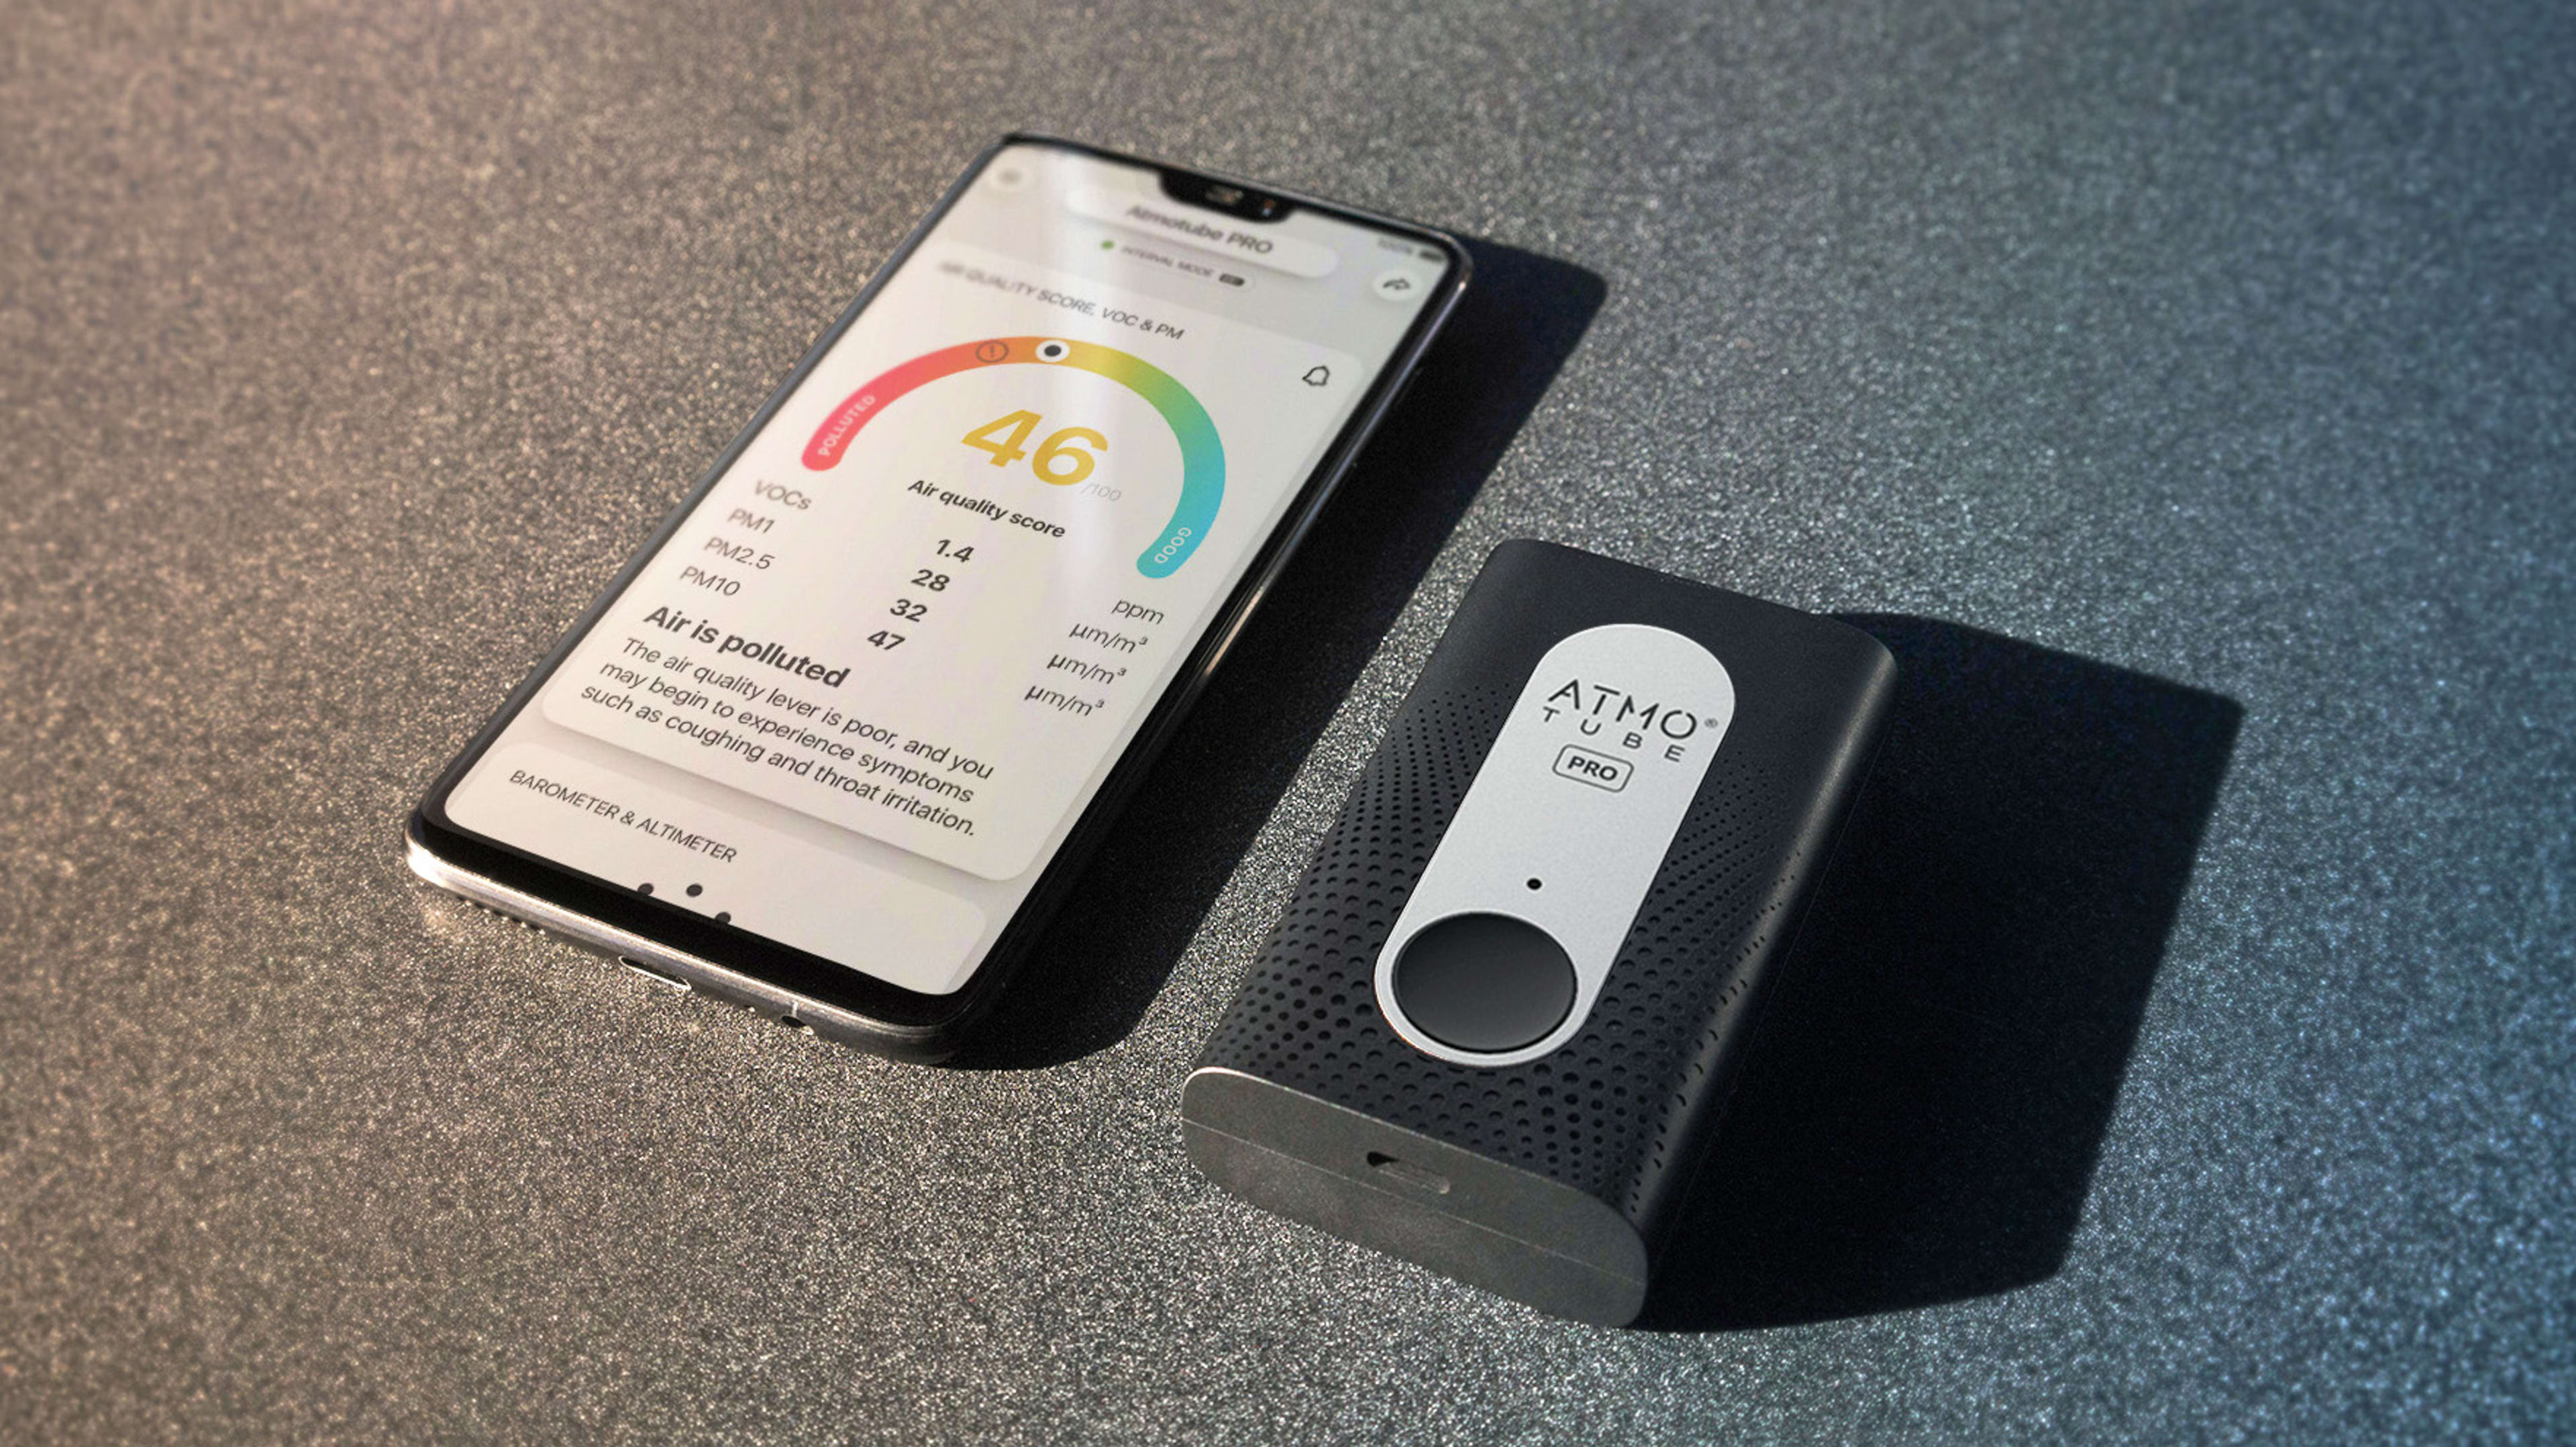 Clip this tiny gadget to your backpack and get real-time reports of the air quality around you